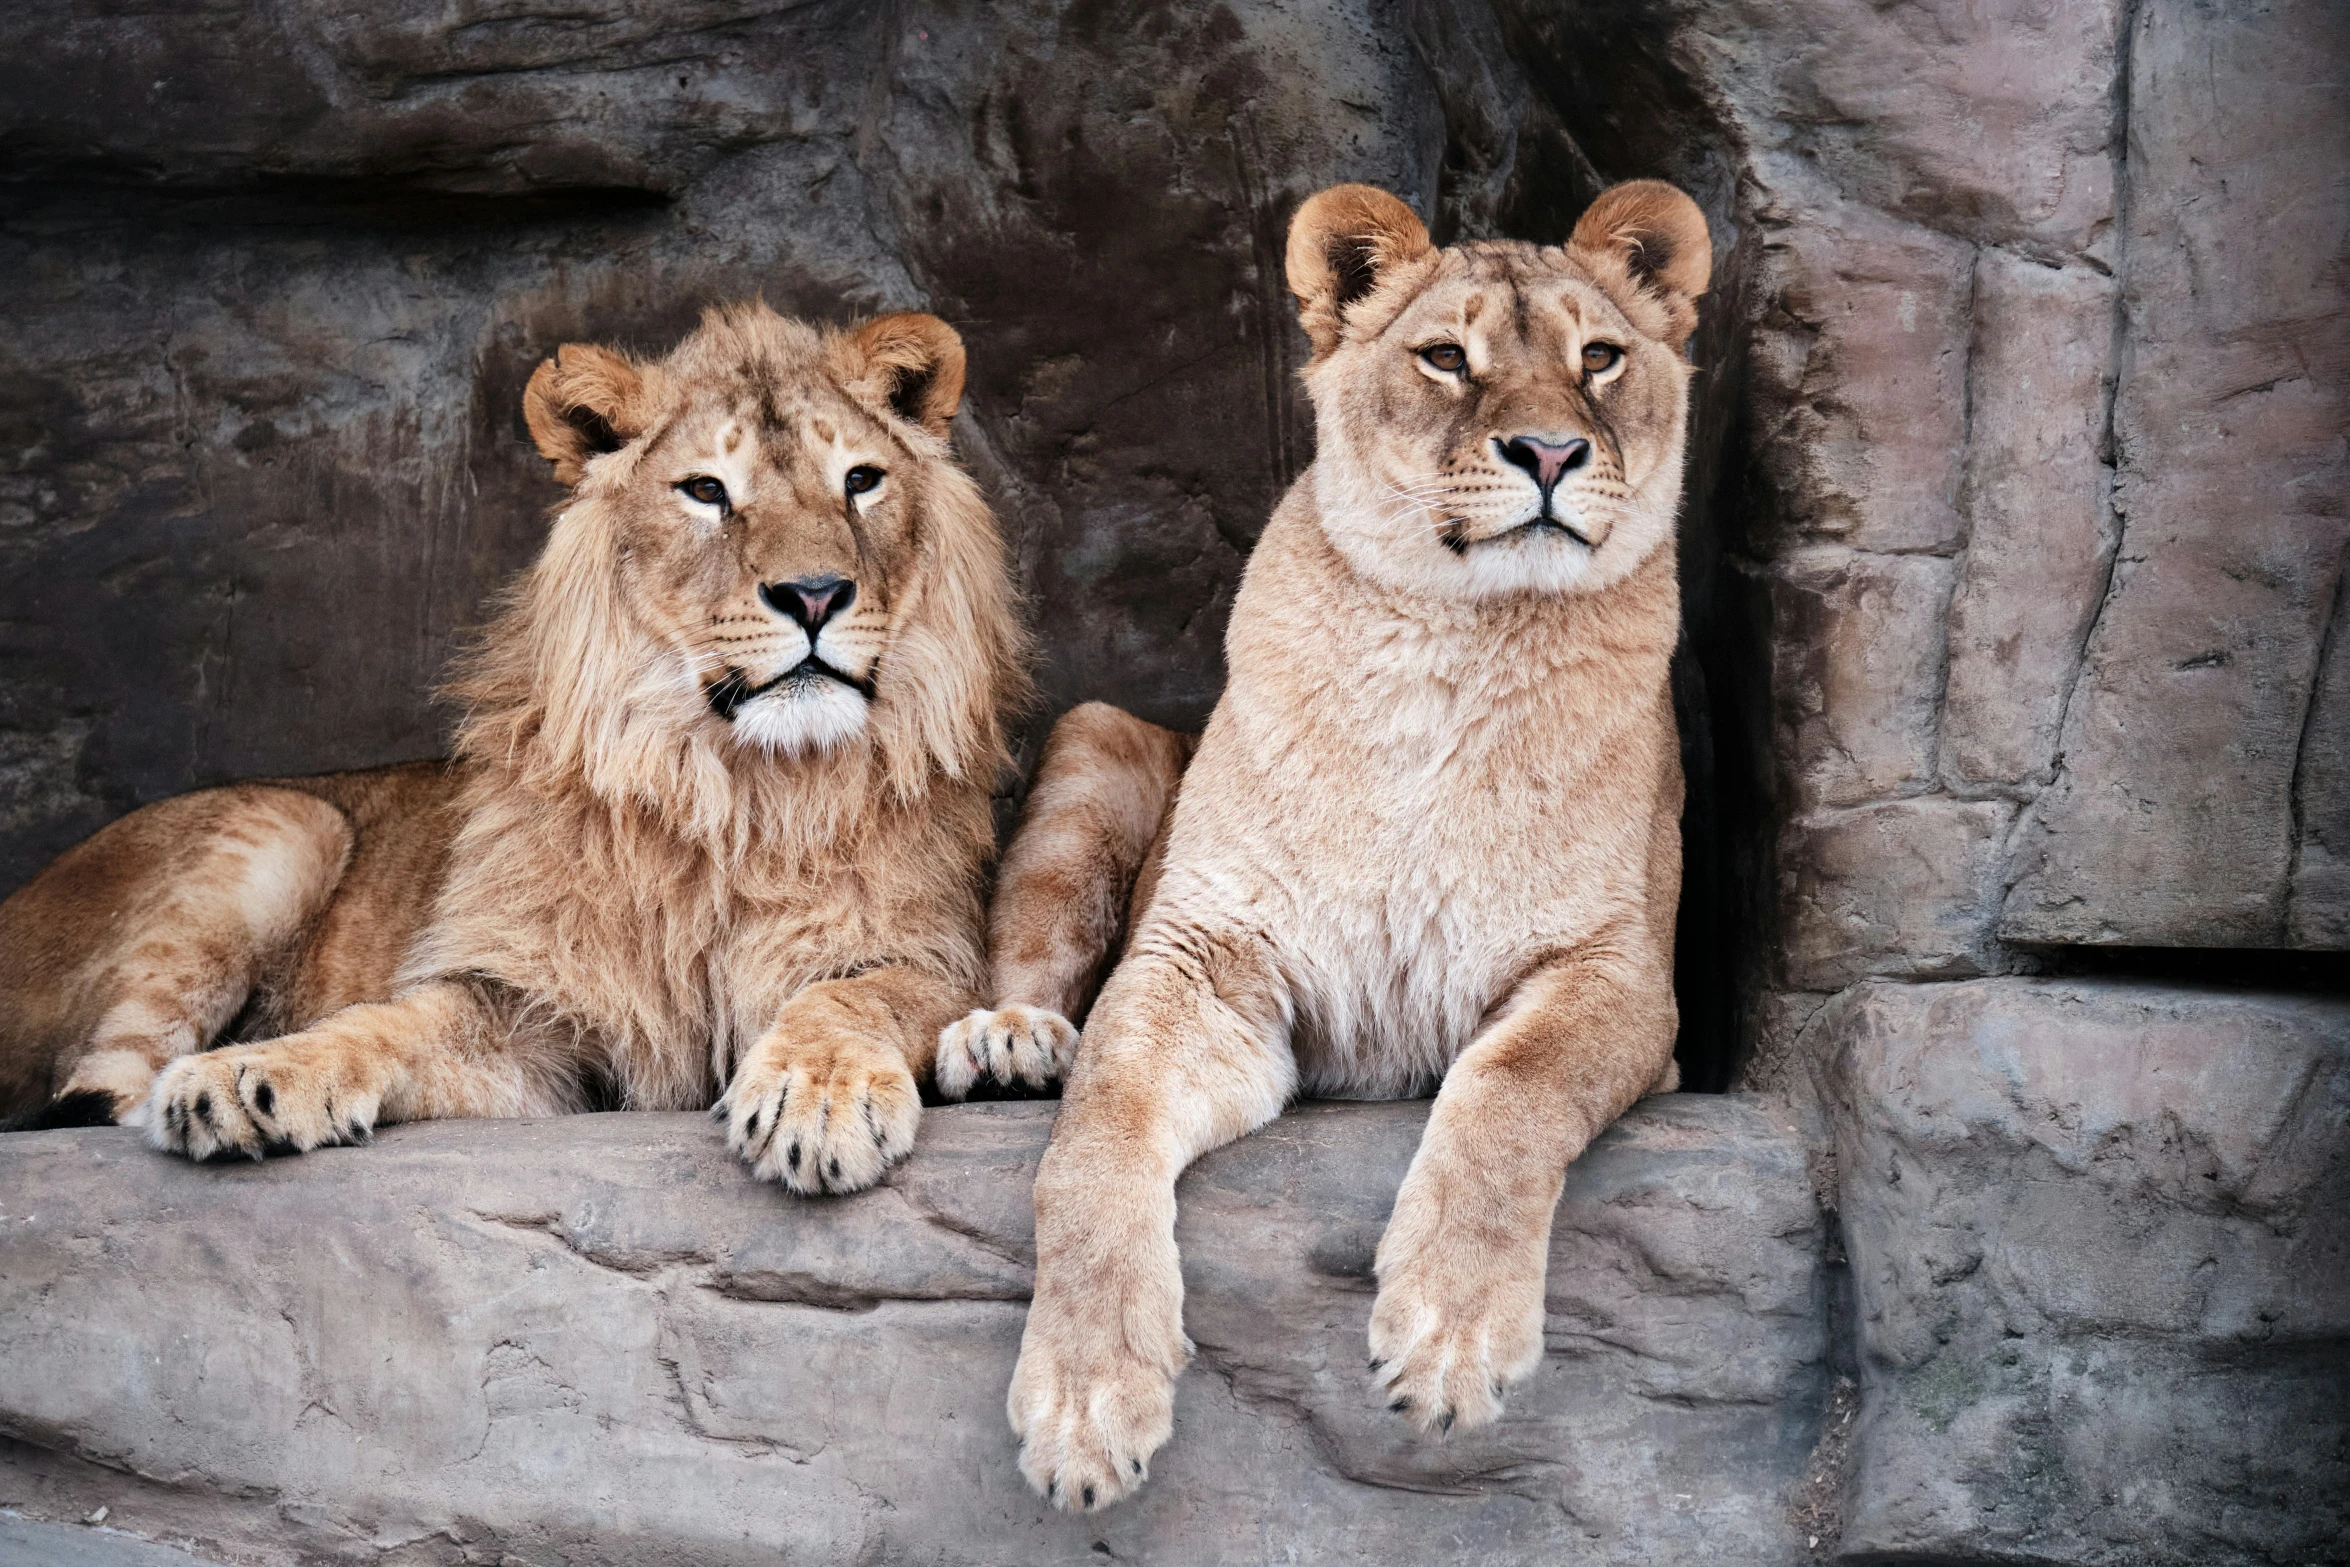 two large lions sitting next to each other on some rocks